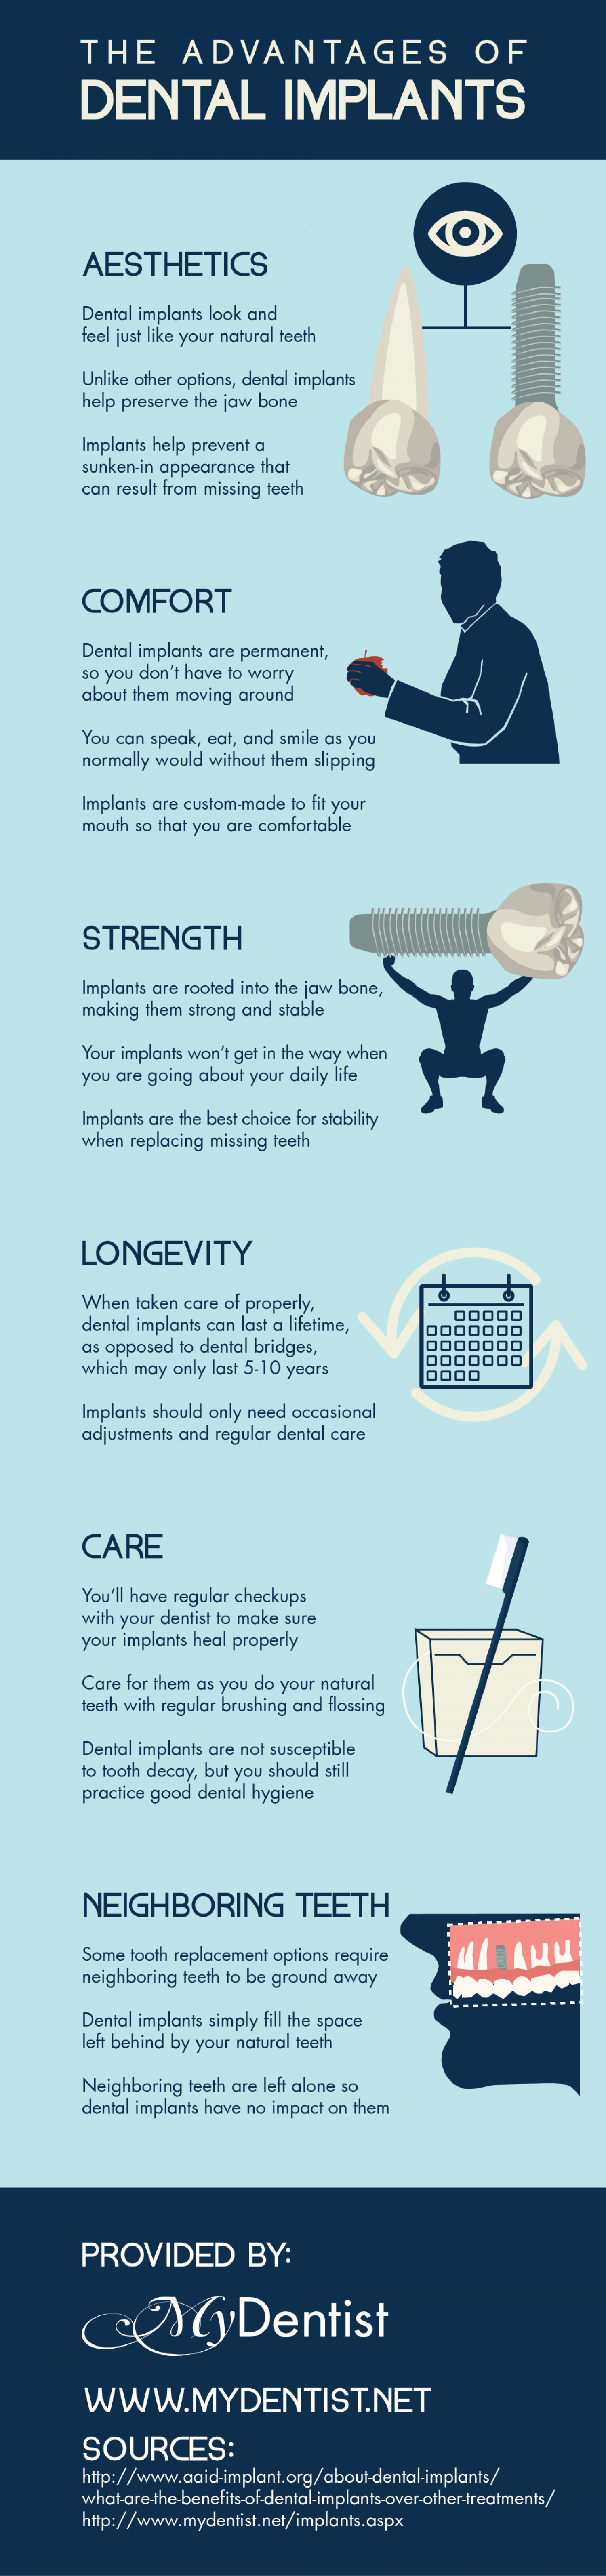 The Advantages of Dental Implants Infographic